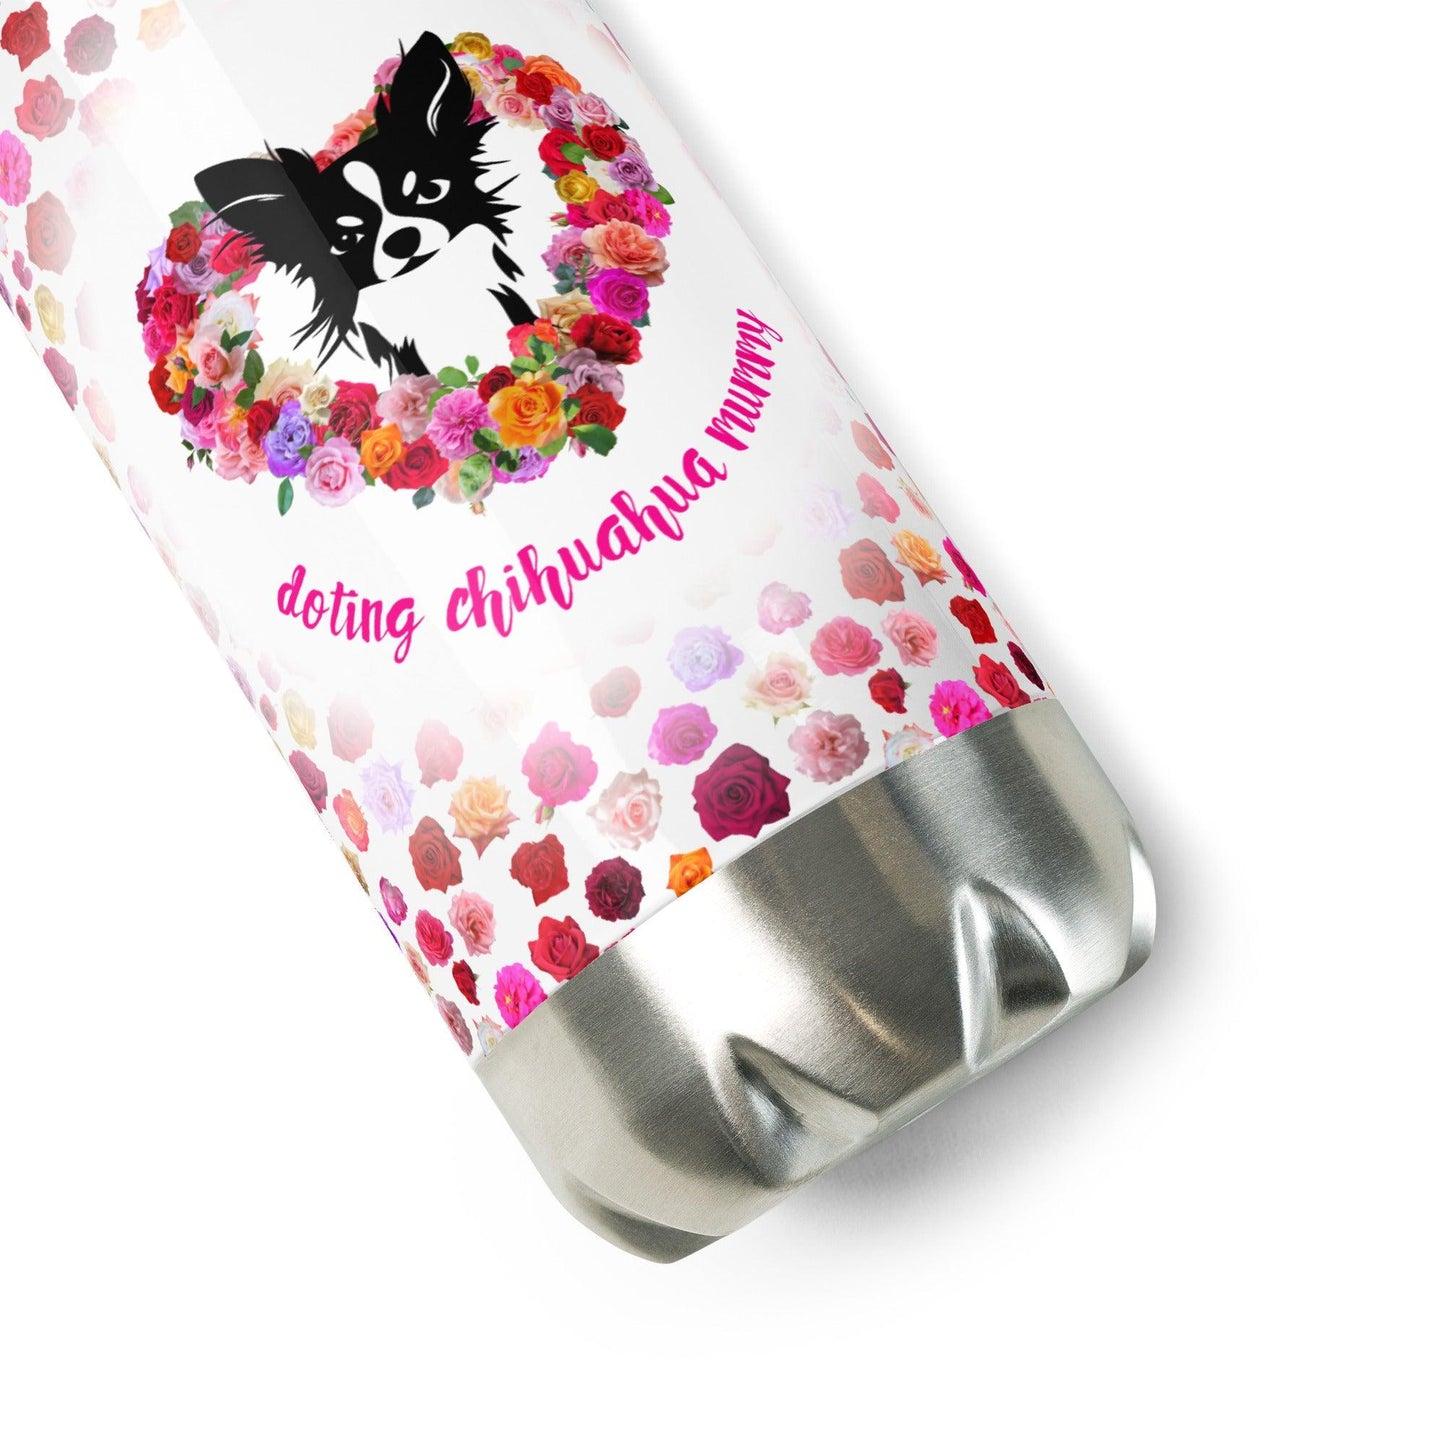 Doting Chihuahua Mummy 500ml double-walled stainless steel vacuum flask / water bottle with leak-proof cap. Keeps drinks hot or cold up to 6 hours. There's something so special about the bond between a girl and her chi baby. These cute little dogs charm their way deep into their mum's heart. This adorable chihuahua and roses flask makes a cute Mother's Day / birthday / Christmas gift for a doting chihuahua mummy. "Aw" guaranteed! Design by Renate Kriegler for Chimigos.